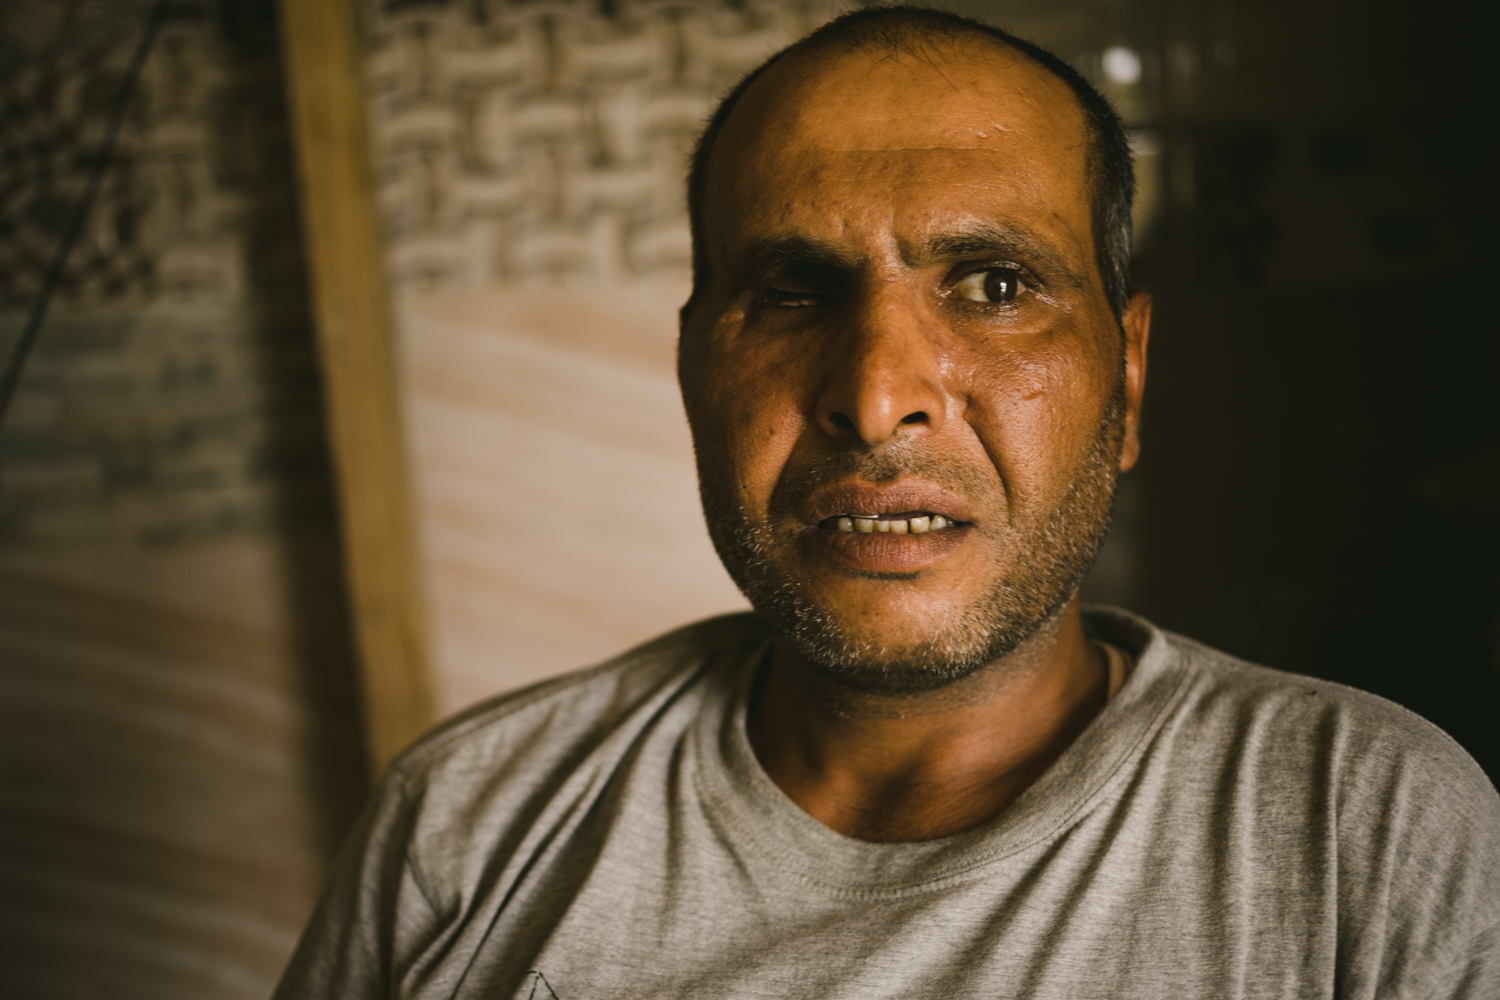  Mazed Tahab, a 39-year-old refugee, lost his eye when a firefight broke out in his neighborhood. He was found injured, and was held in captivity for over a year and deprived of medical treatment. He now tries to find work as a handyman to help his f